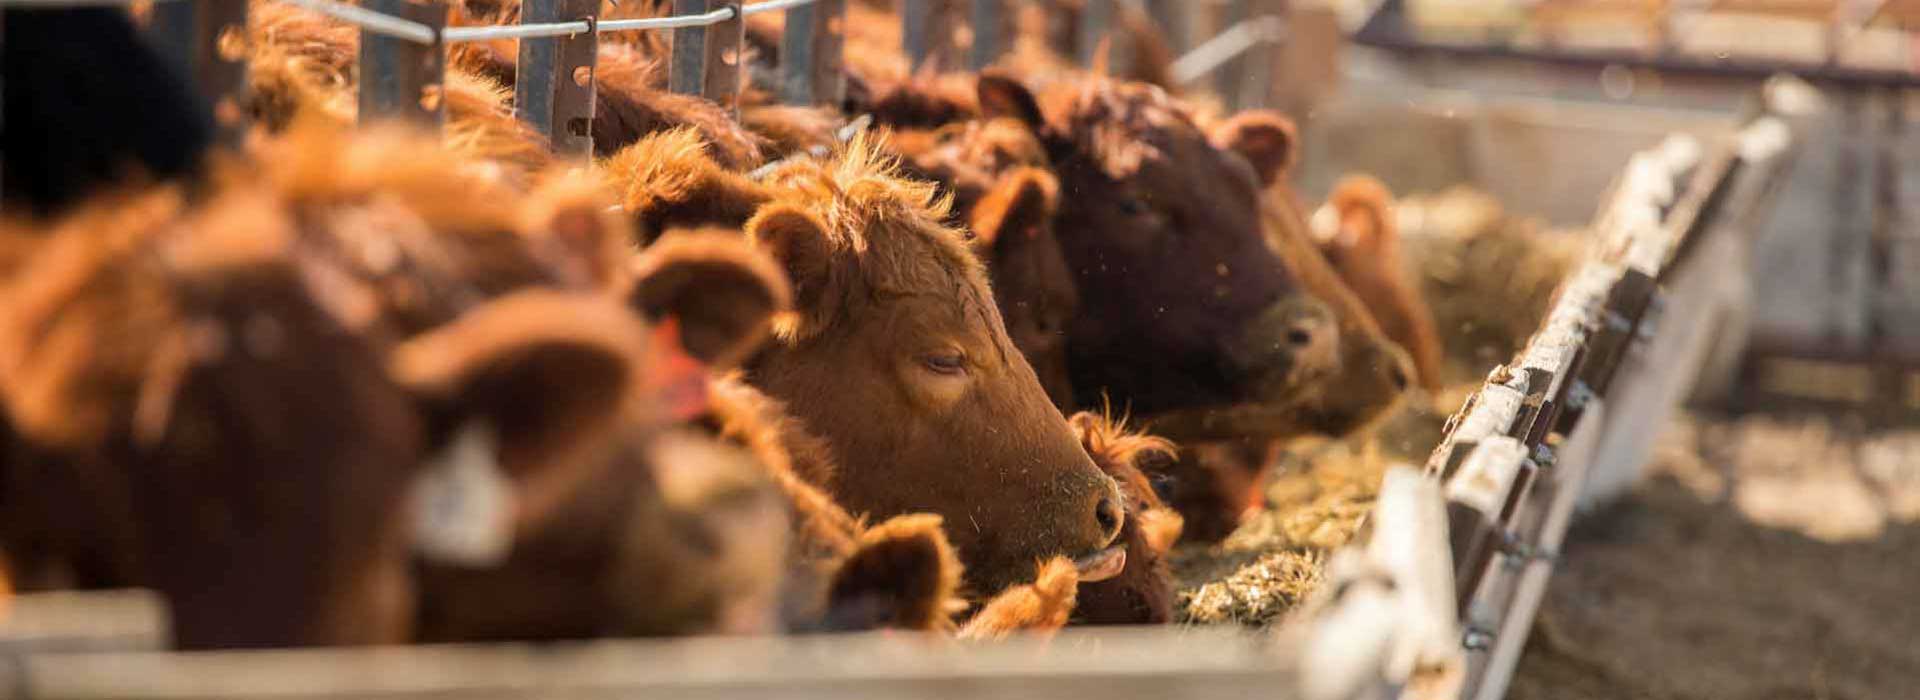 Beef Cattle | Alltech, Working Together for a Planet of Plenty